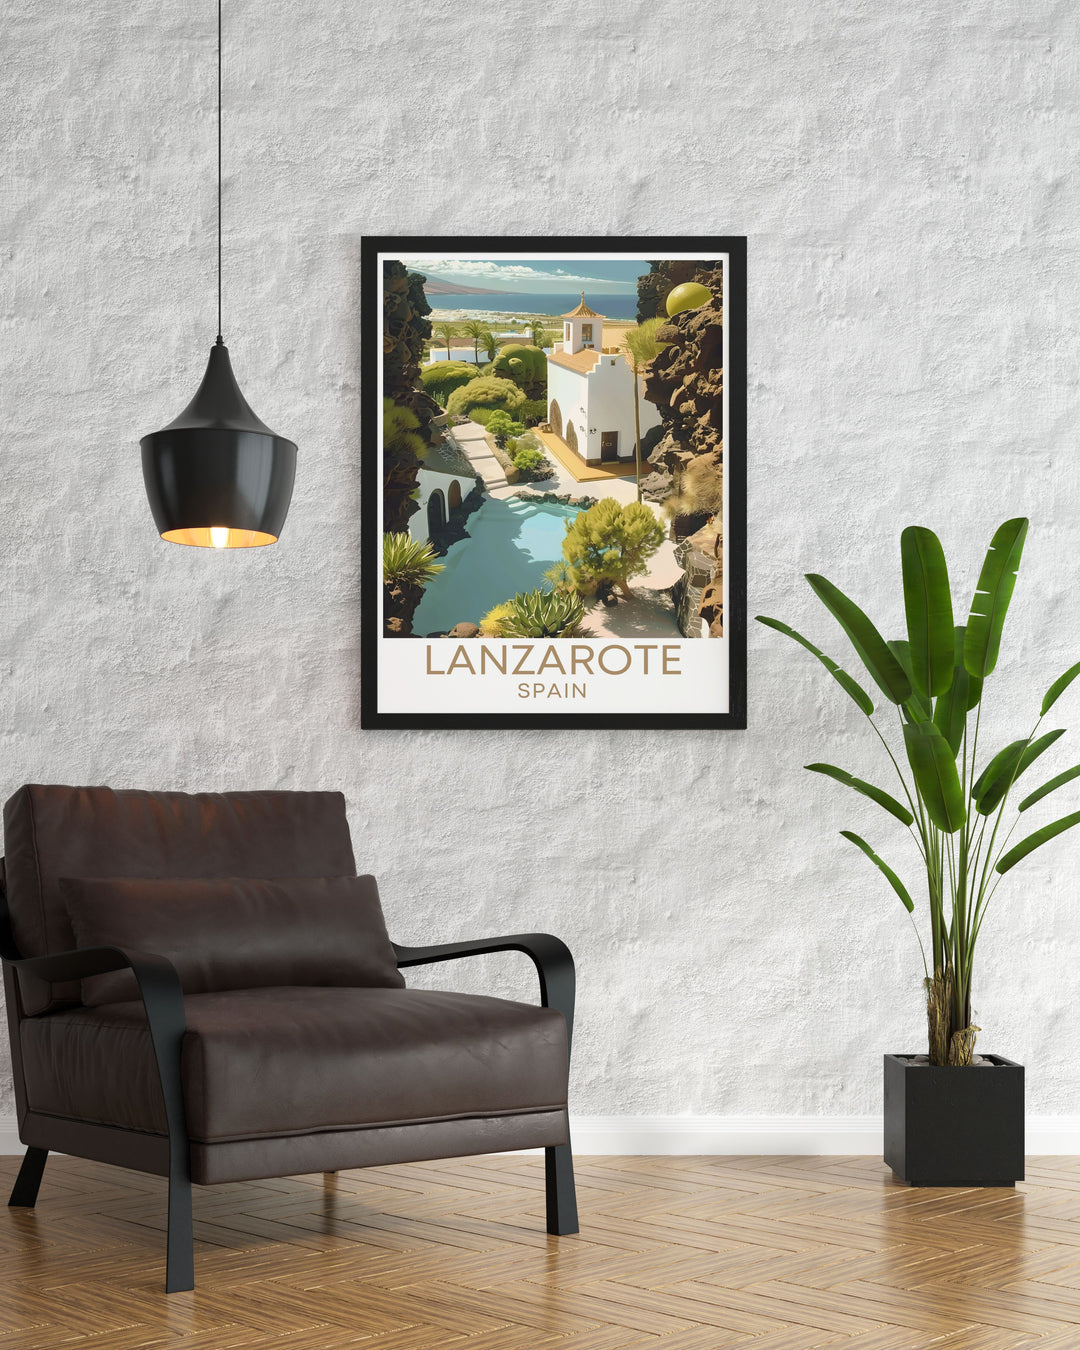 Highlighting the beautiful Cesar Manrique Foundation in Lanzarote, this travel poster captures the essence of Manriques environmental art, bringing the islands striking contrasts of black lava, white buildings, and blue skies into your living space.